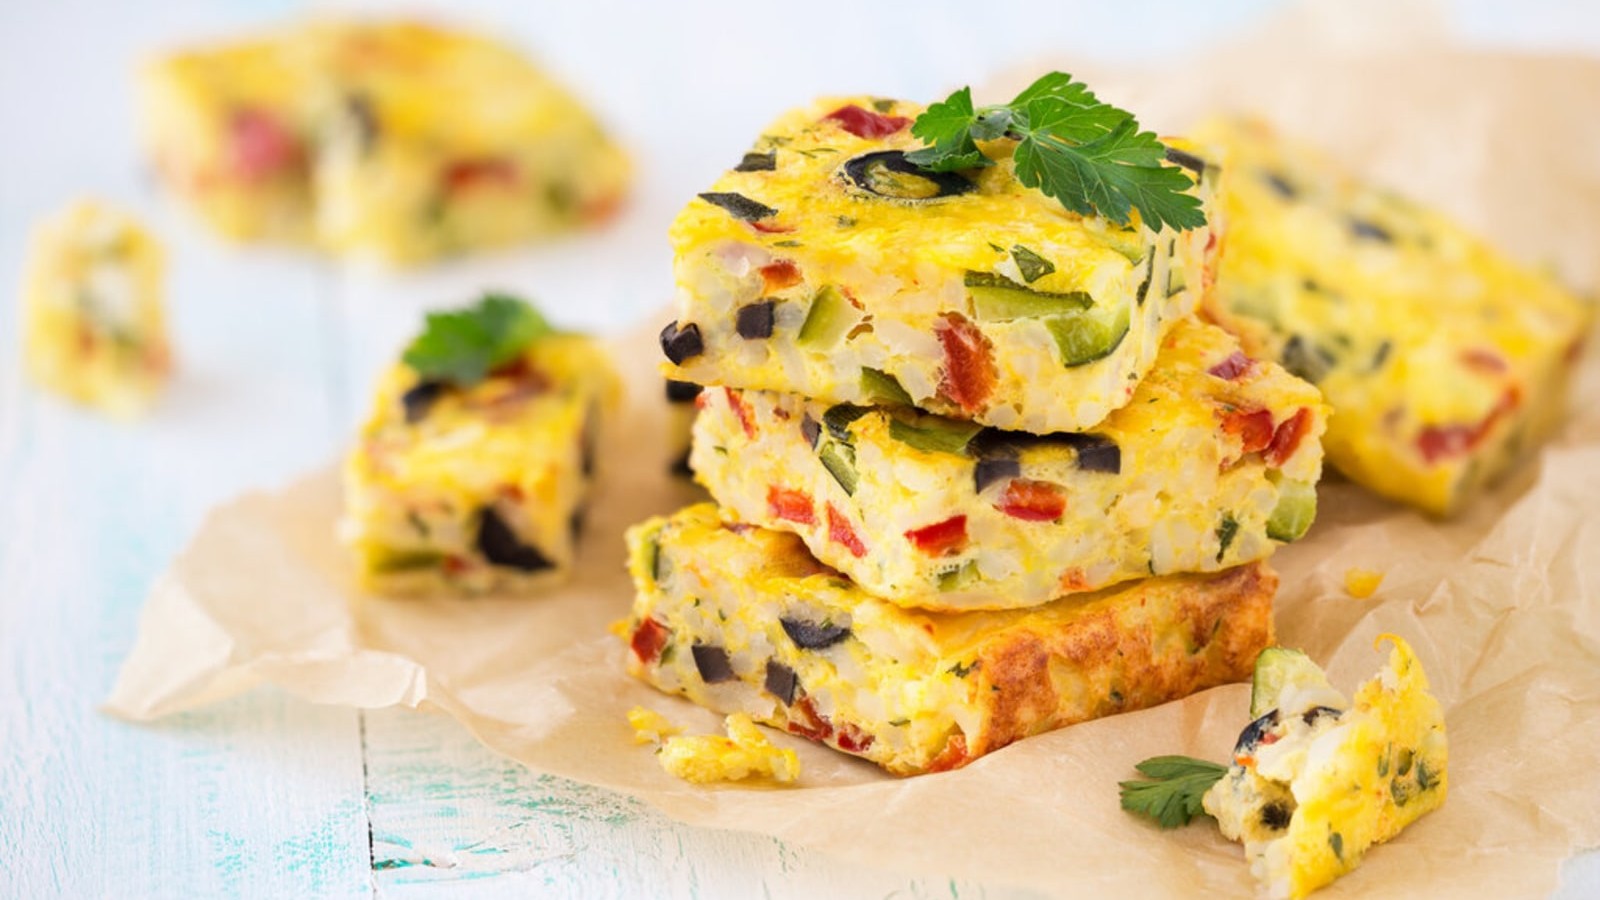 Image of Vegan Frittata Recipe With Tofu Base and Loaded With Vegetables!